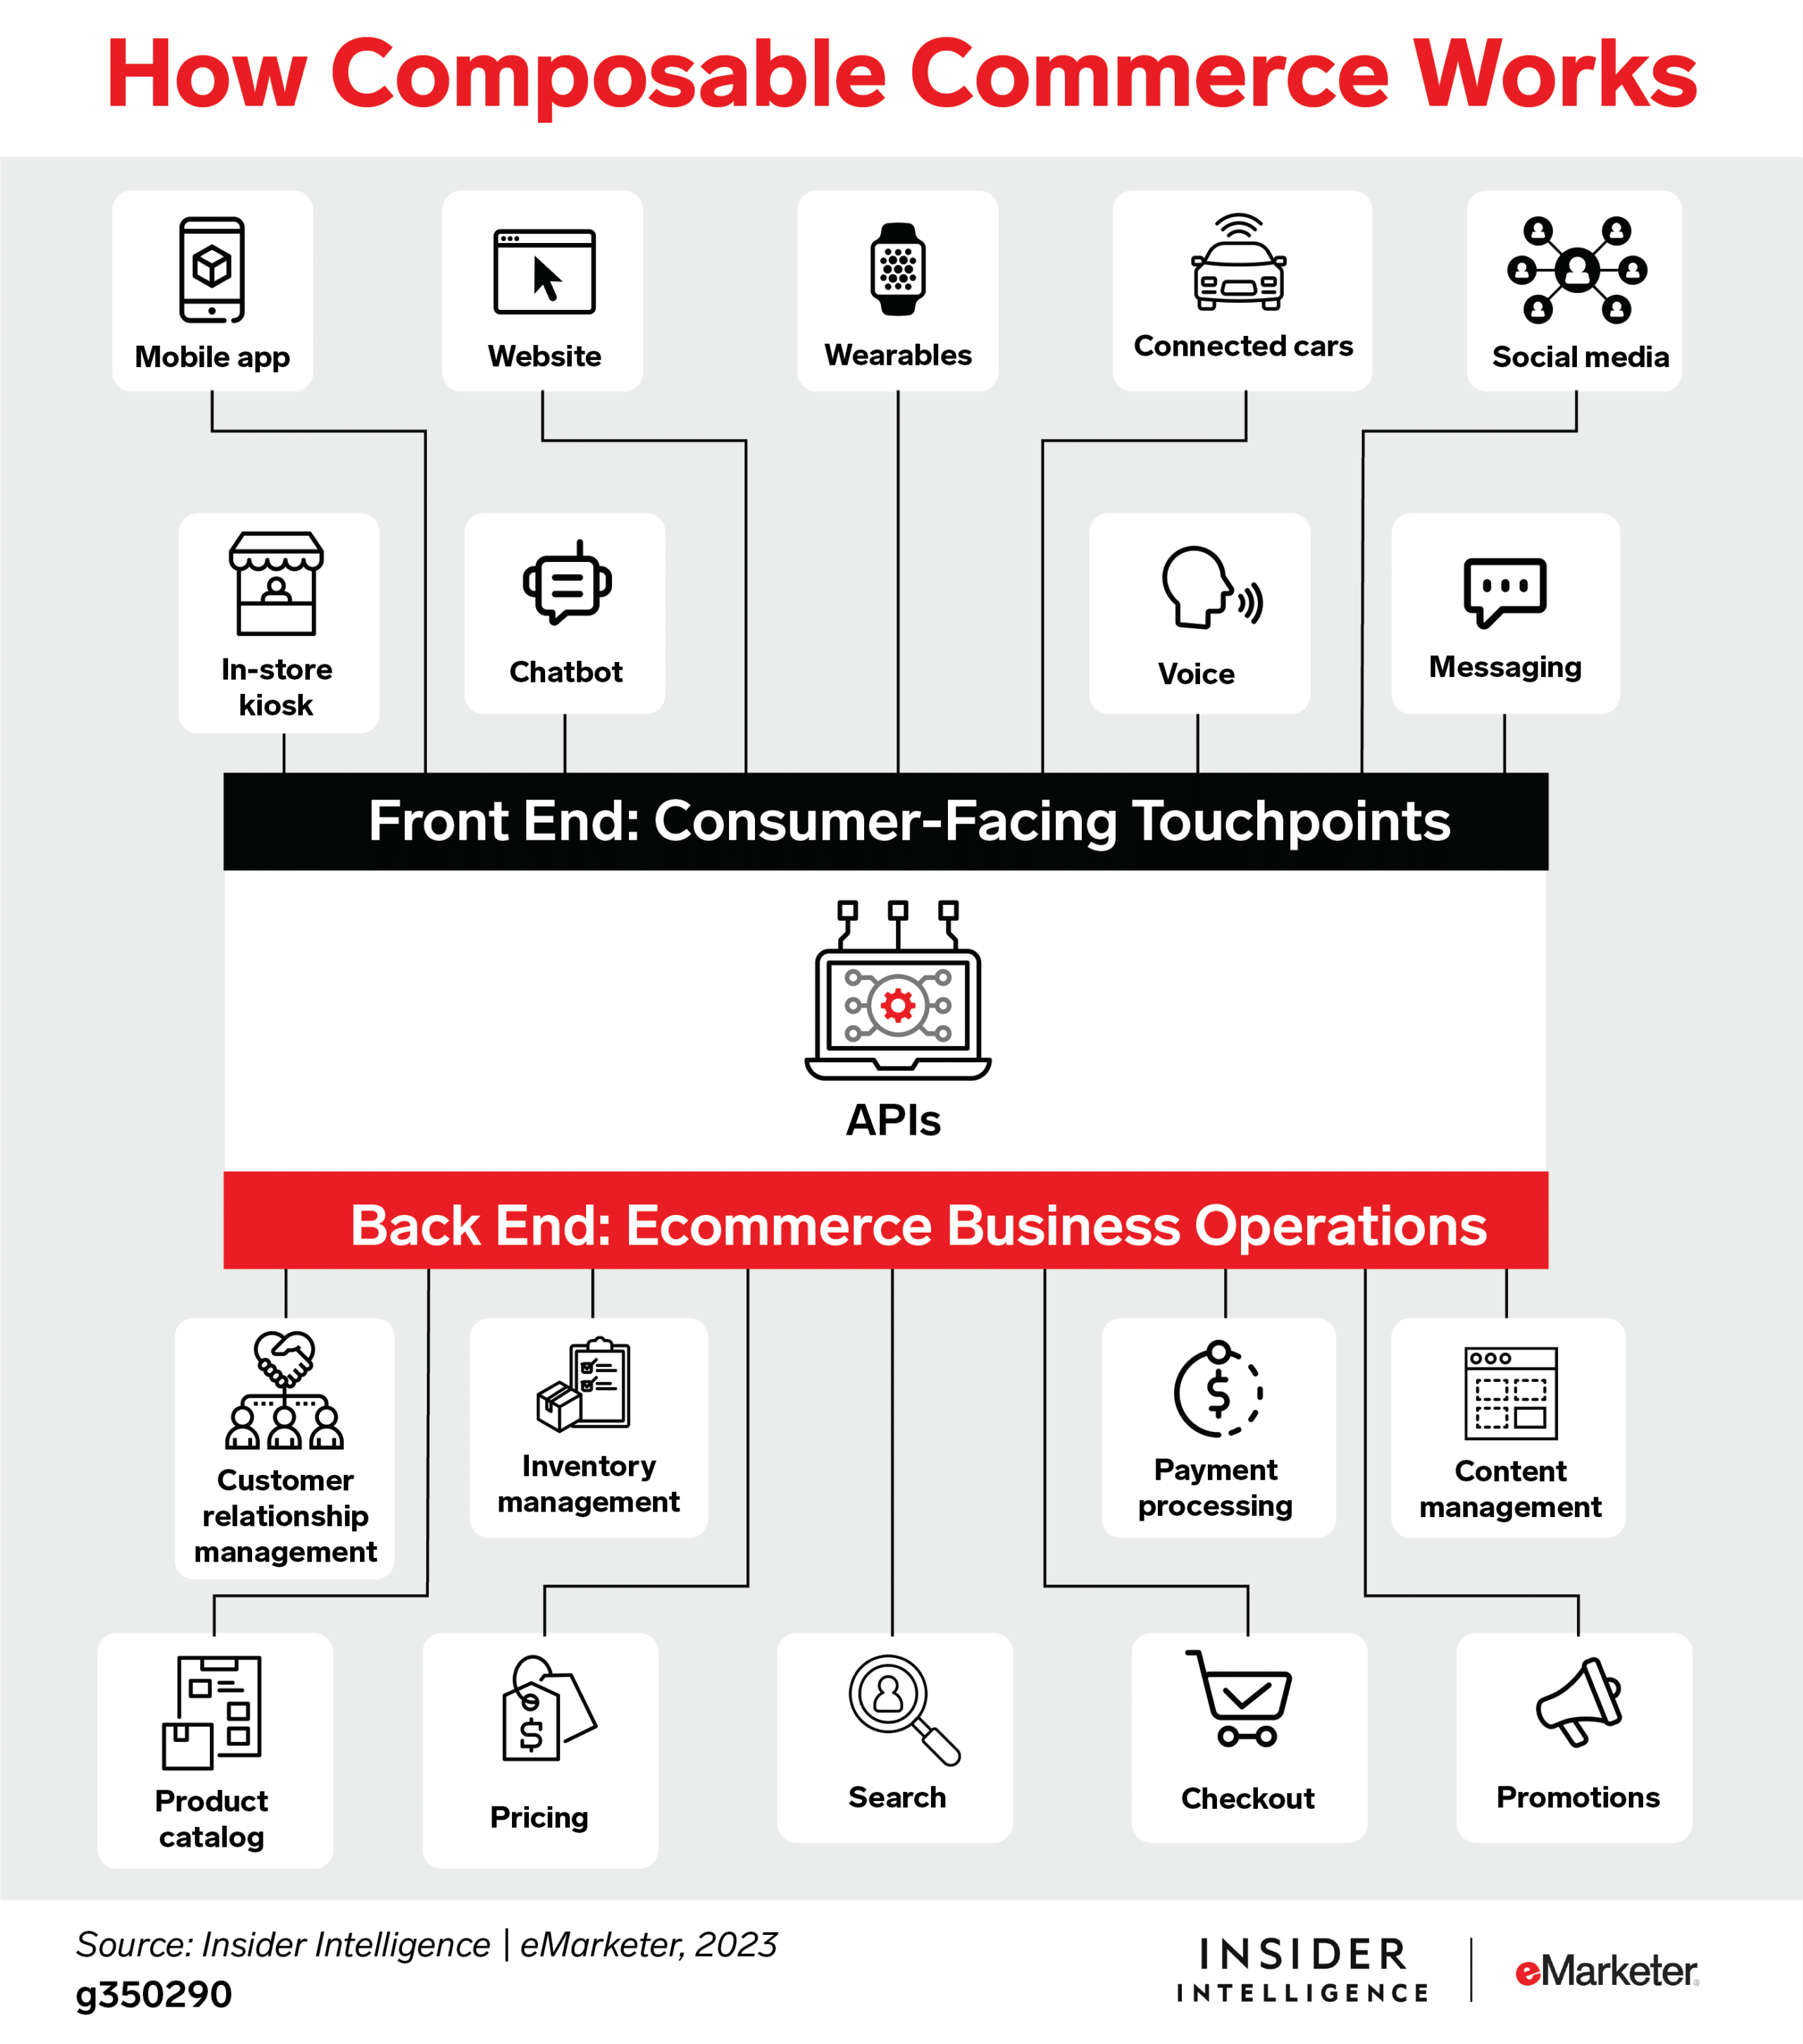 how composable commerce works